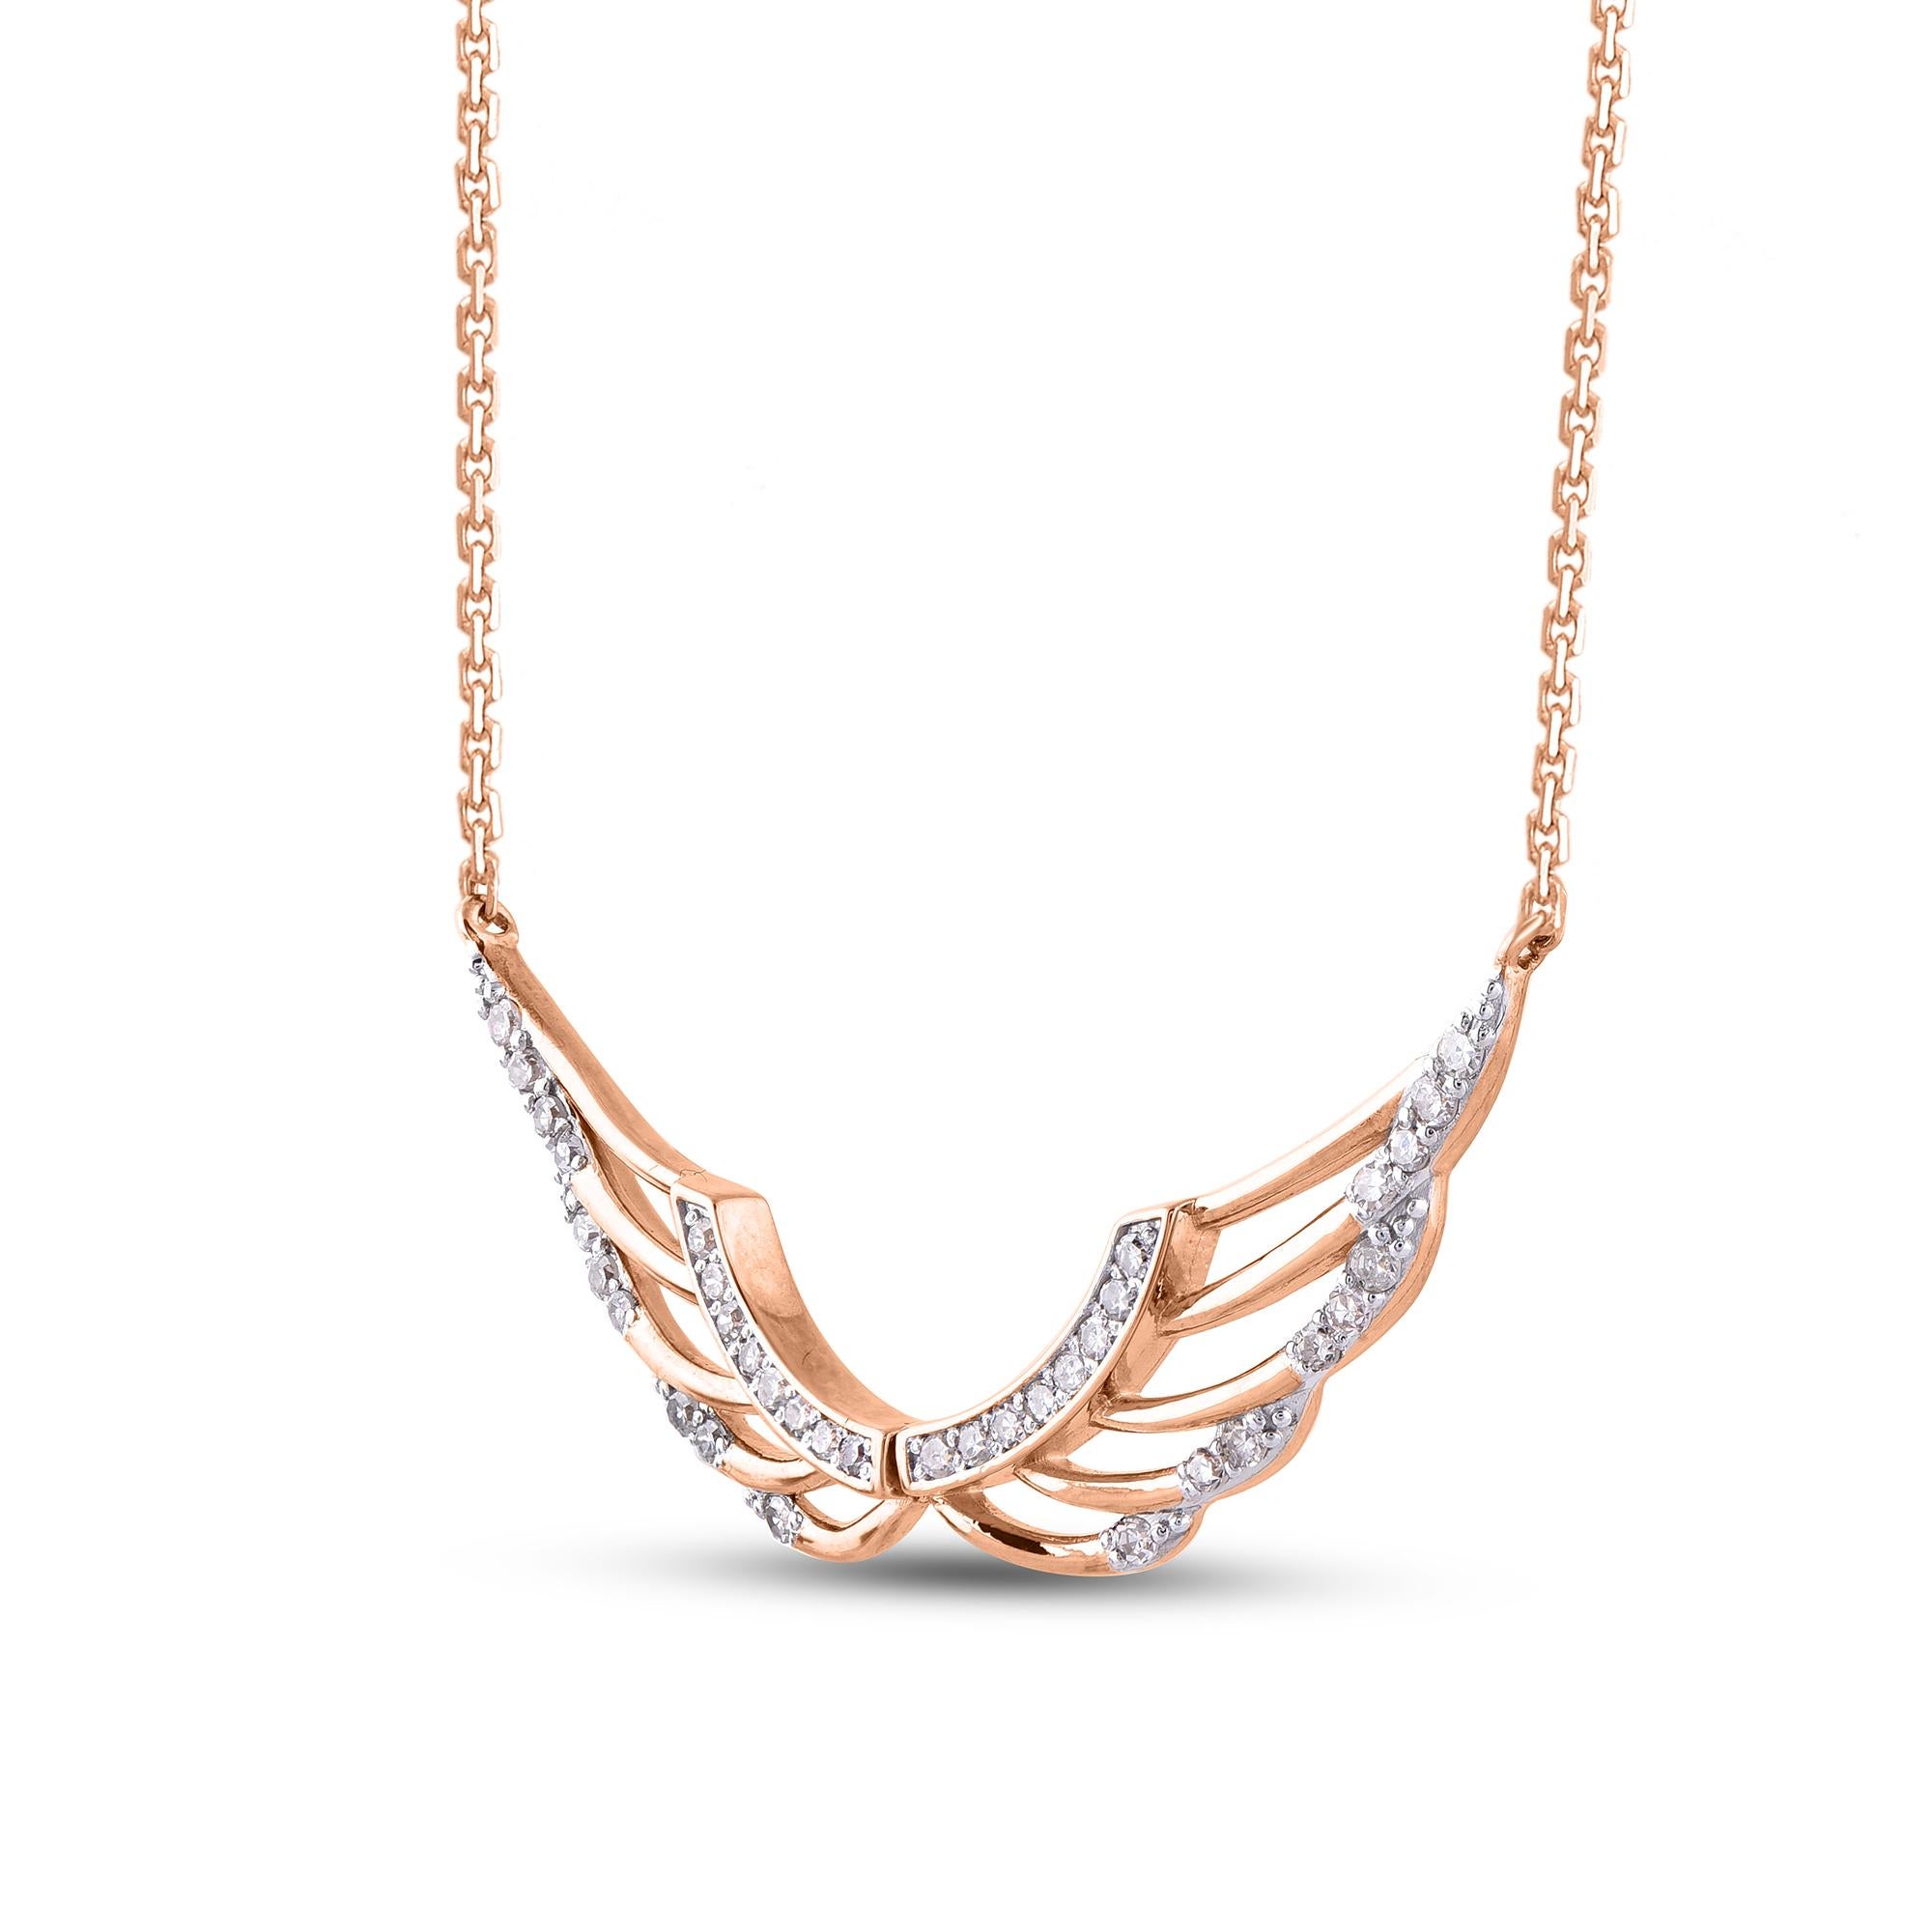 Charm and inspire with this diamond angel wing pendant. Glitters with 36 round diamonds HI/I2 quality set in prong setting and crafted by our inhouse craftsmen in 14 kt rose gold. This pendant suspends along with an cable chain.